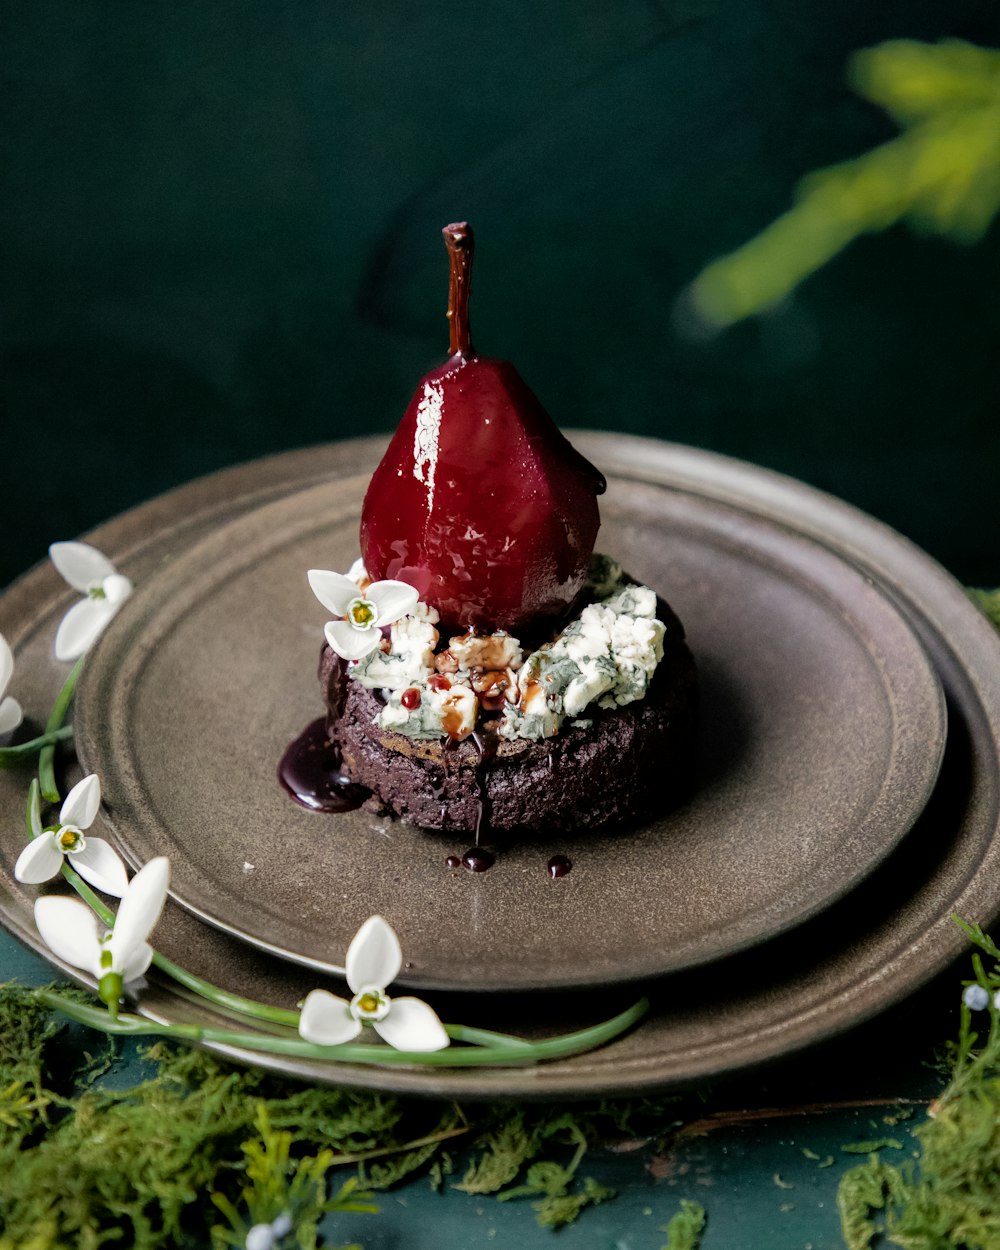 a chocolate dessert with a cherry on top of it